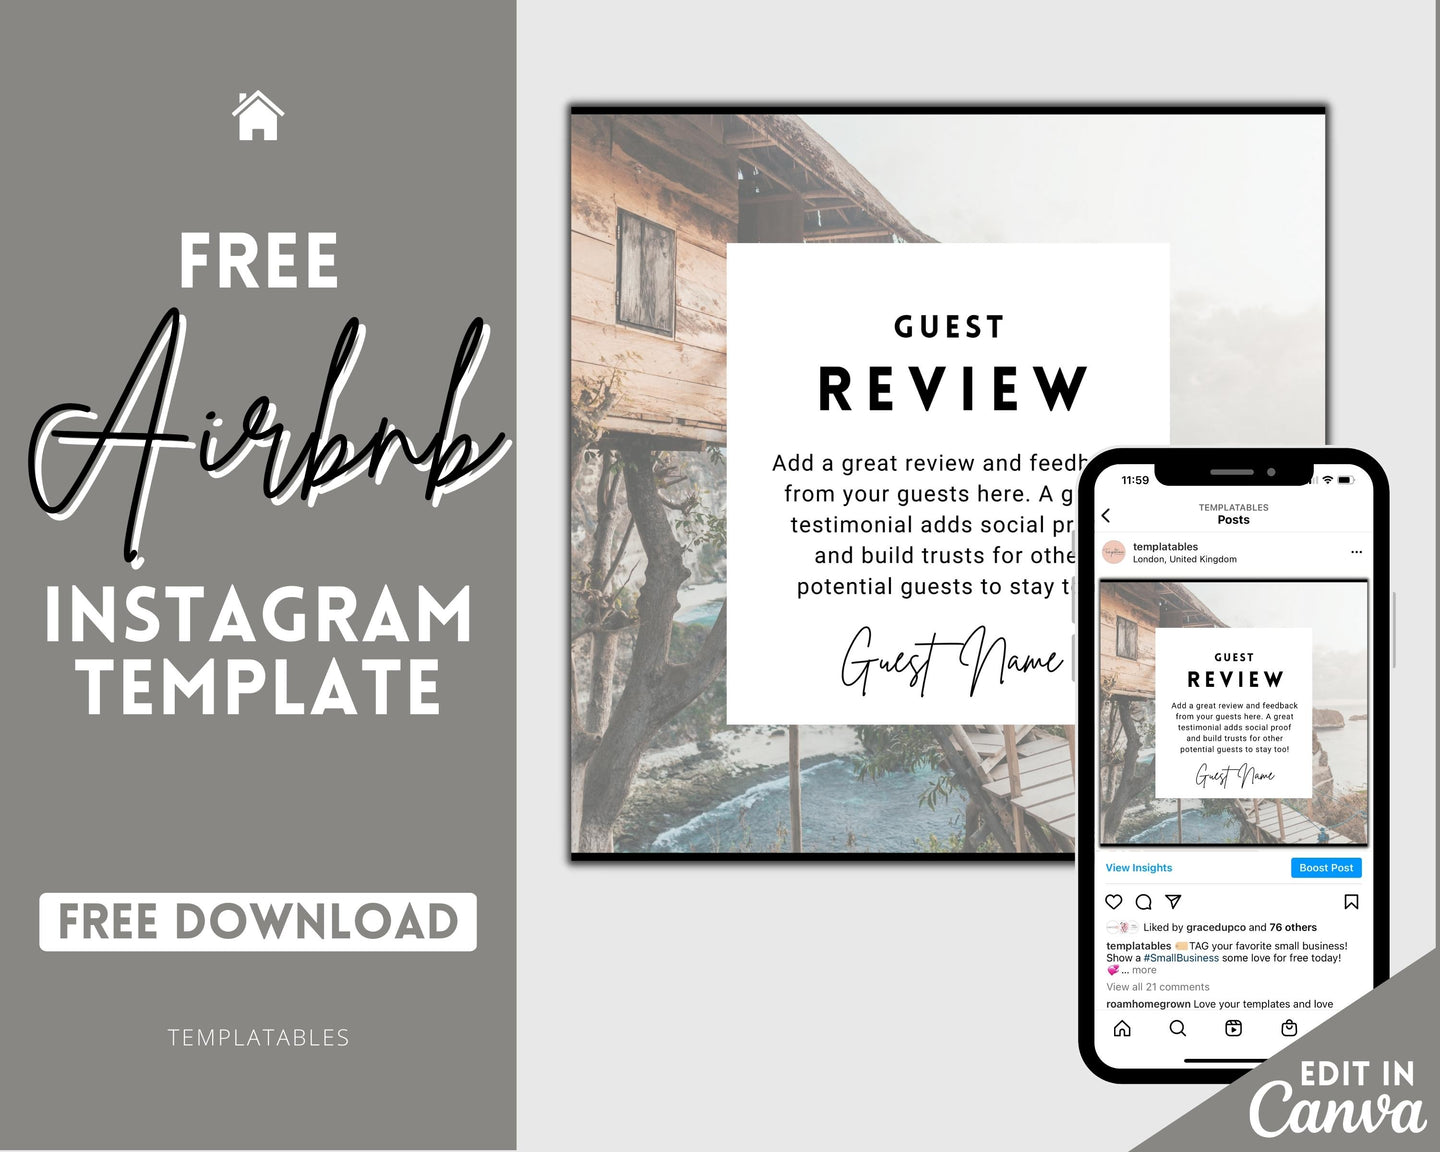 FREE - Airbnb Instagram Template